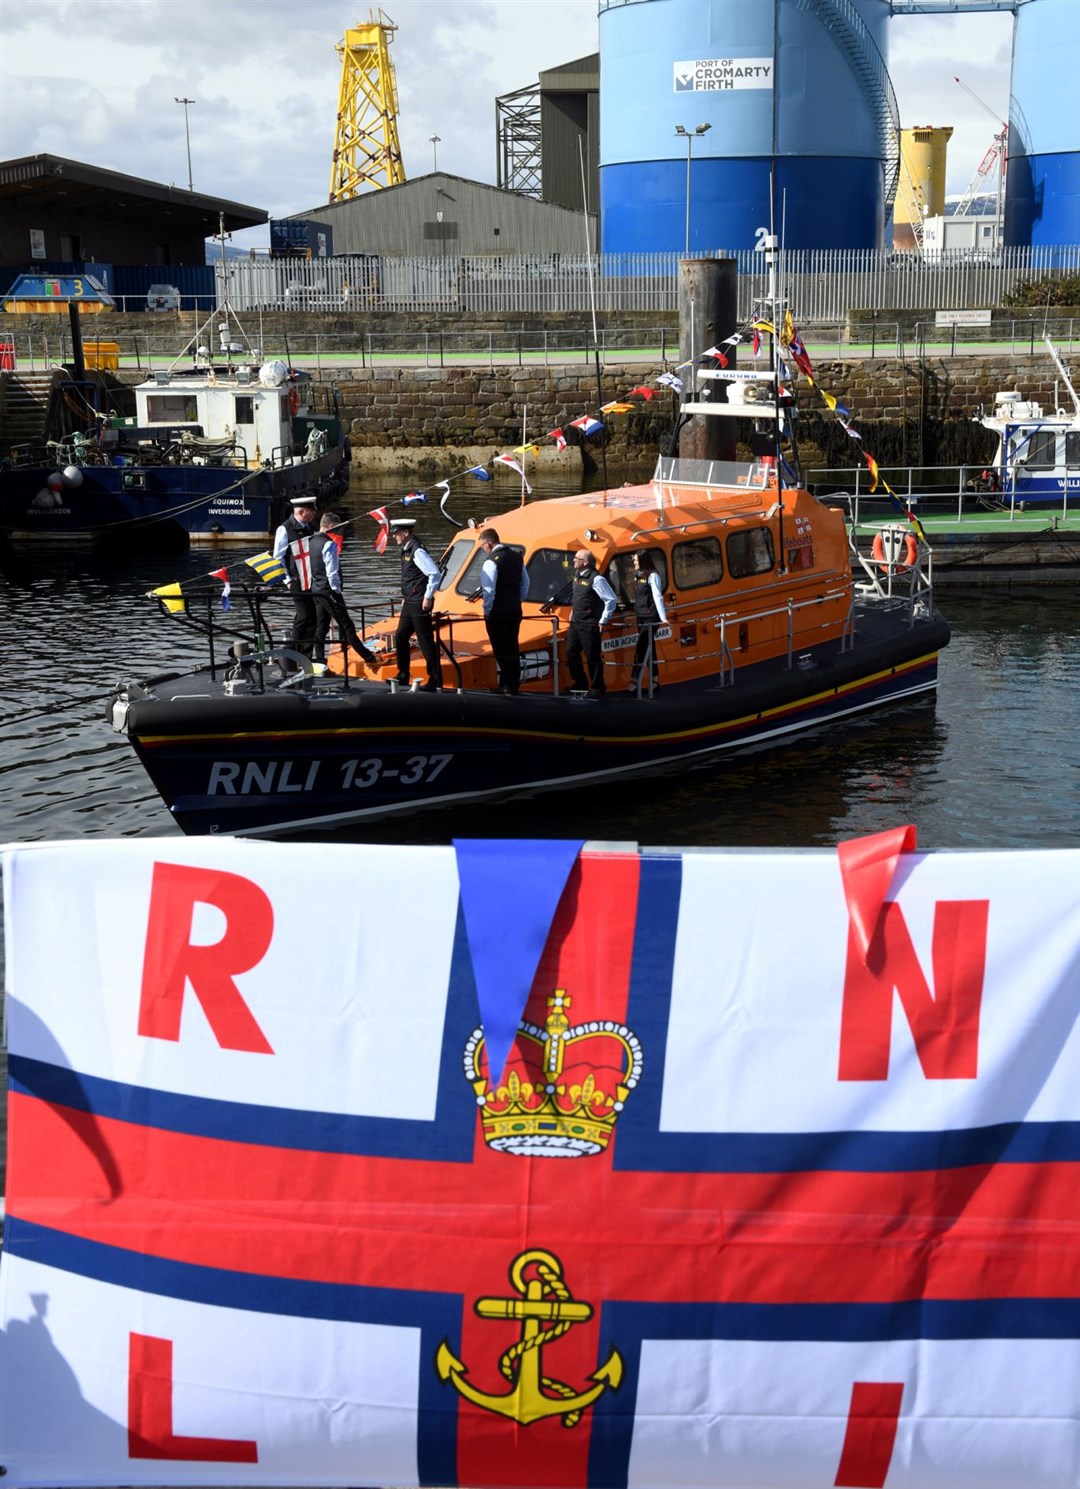 The naming of the new lifeboat at Invergordon Lifeboat Station was a proud moment. The vessel includes thousands of names of supporters' loved ones on its side and has become known across the country as a result. Picture: James Mackenzie.